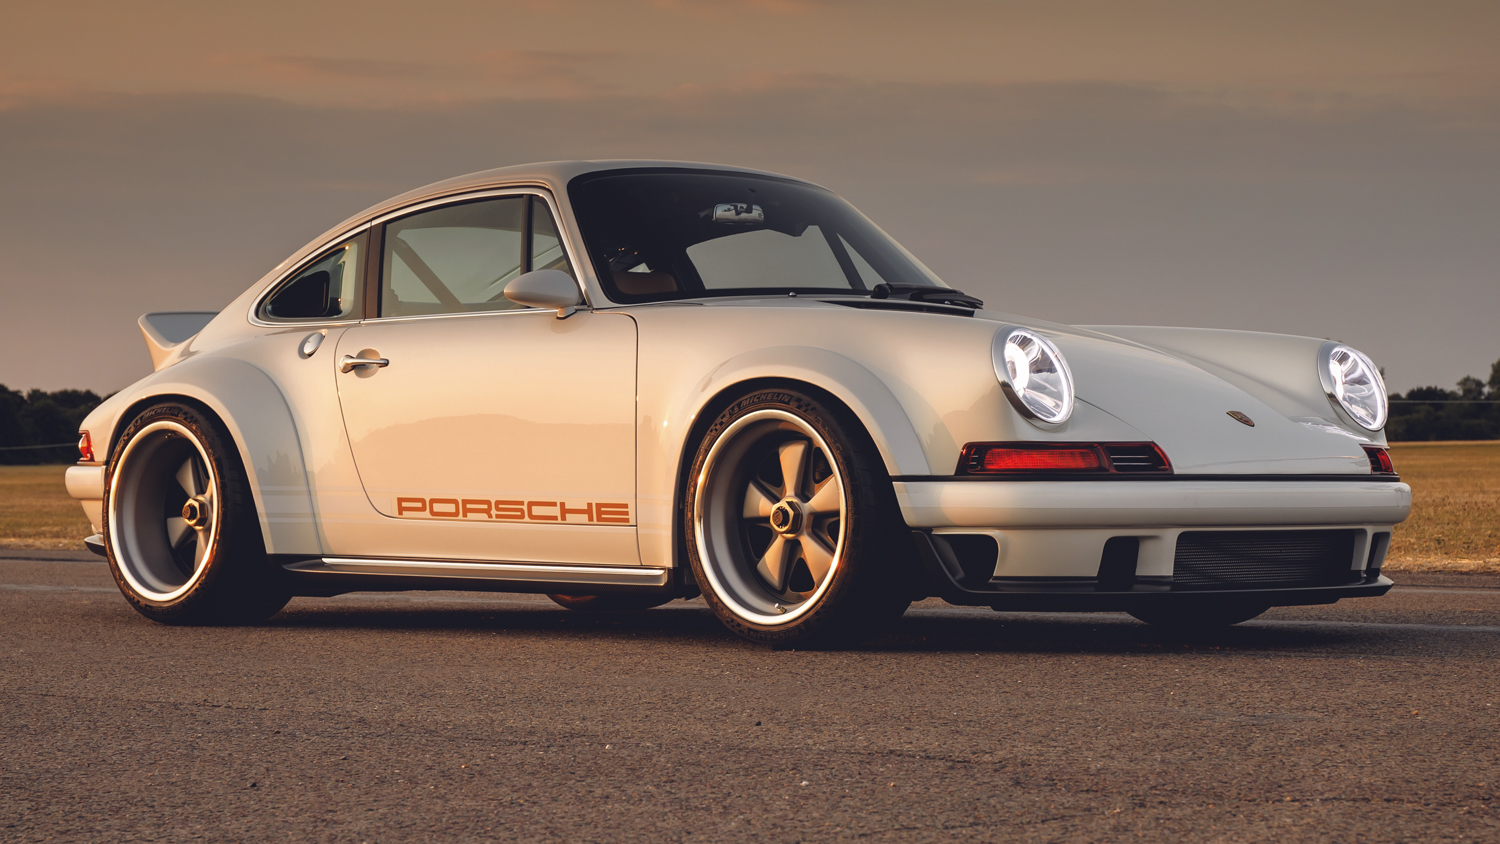 Photo Of The Day: Singer 911 in Racing Silver With Ruby Red Interior -  GTspirit